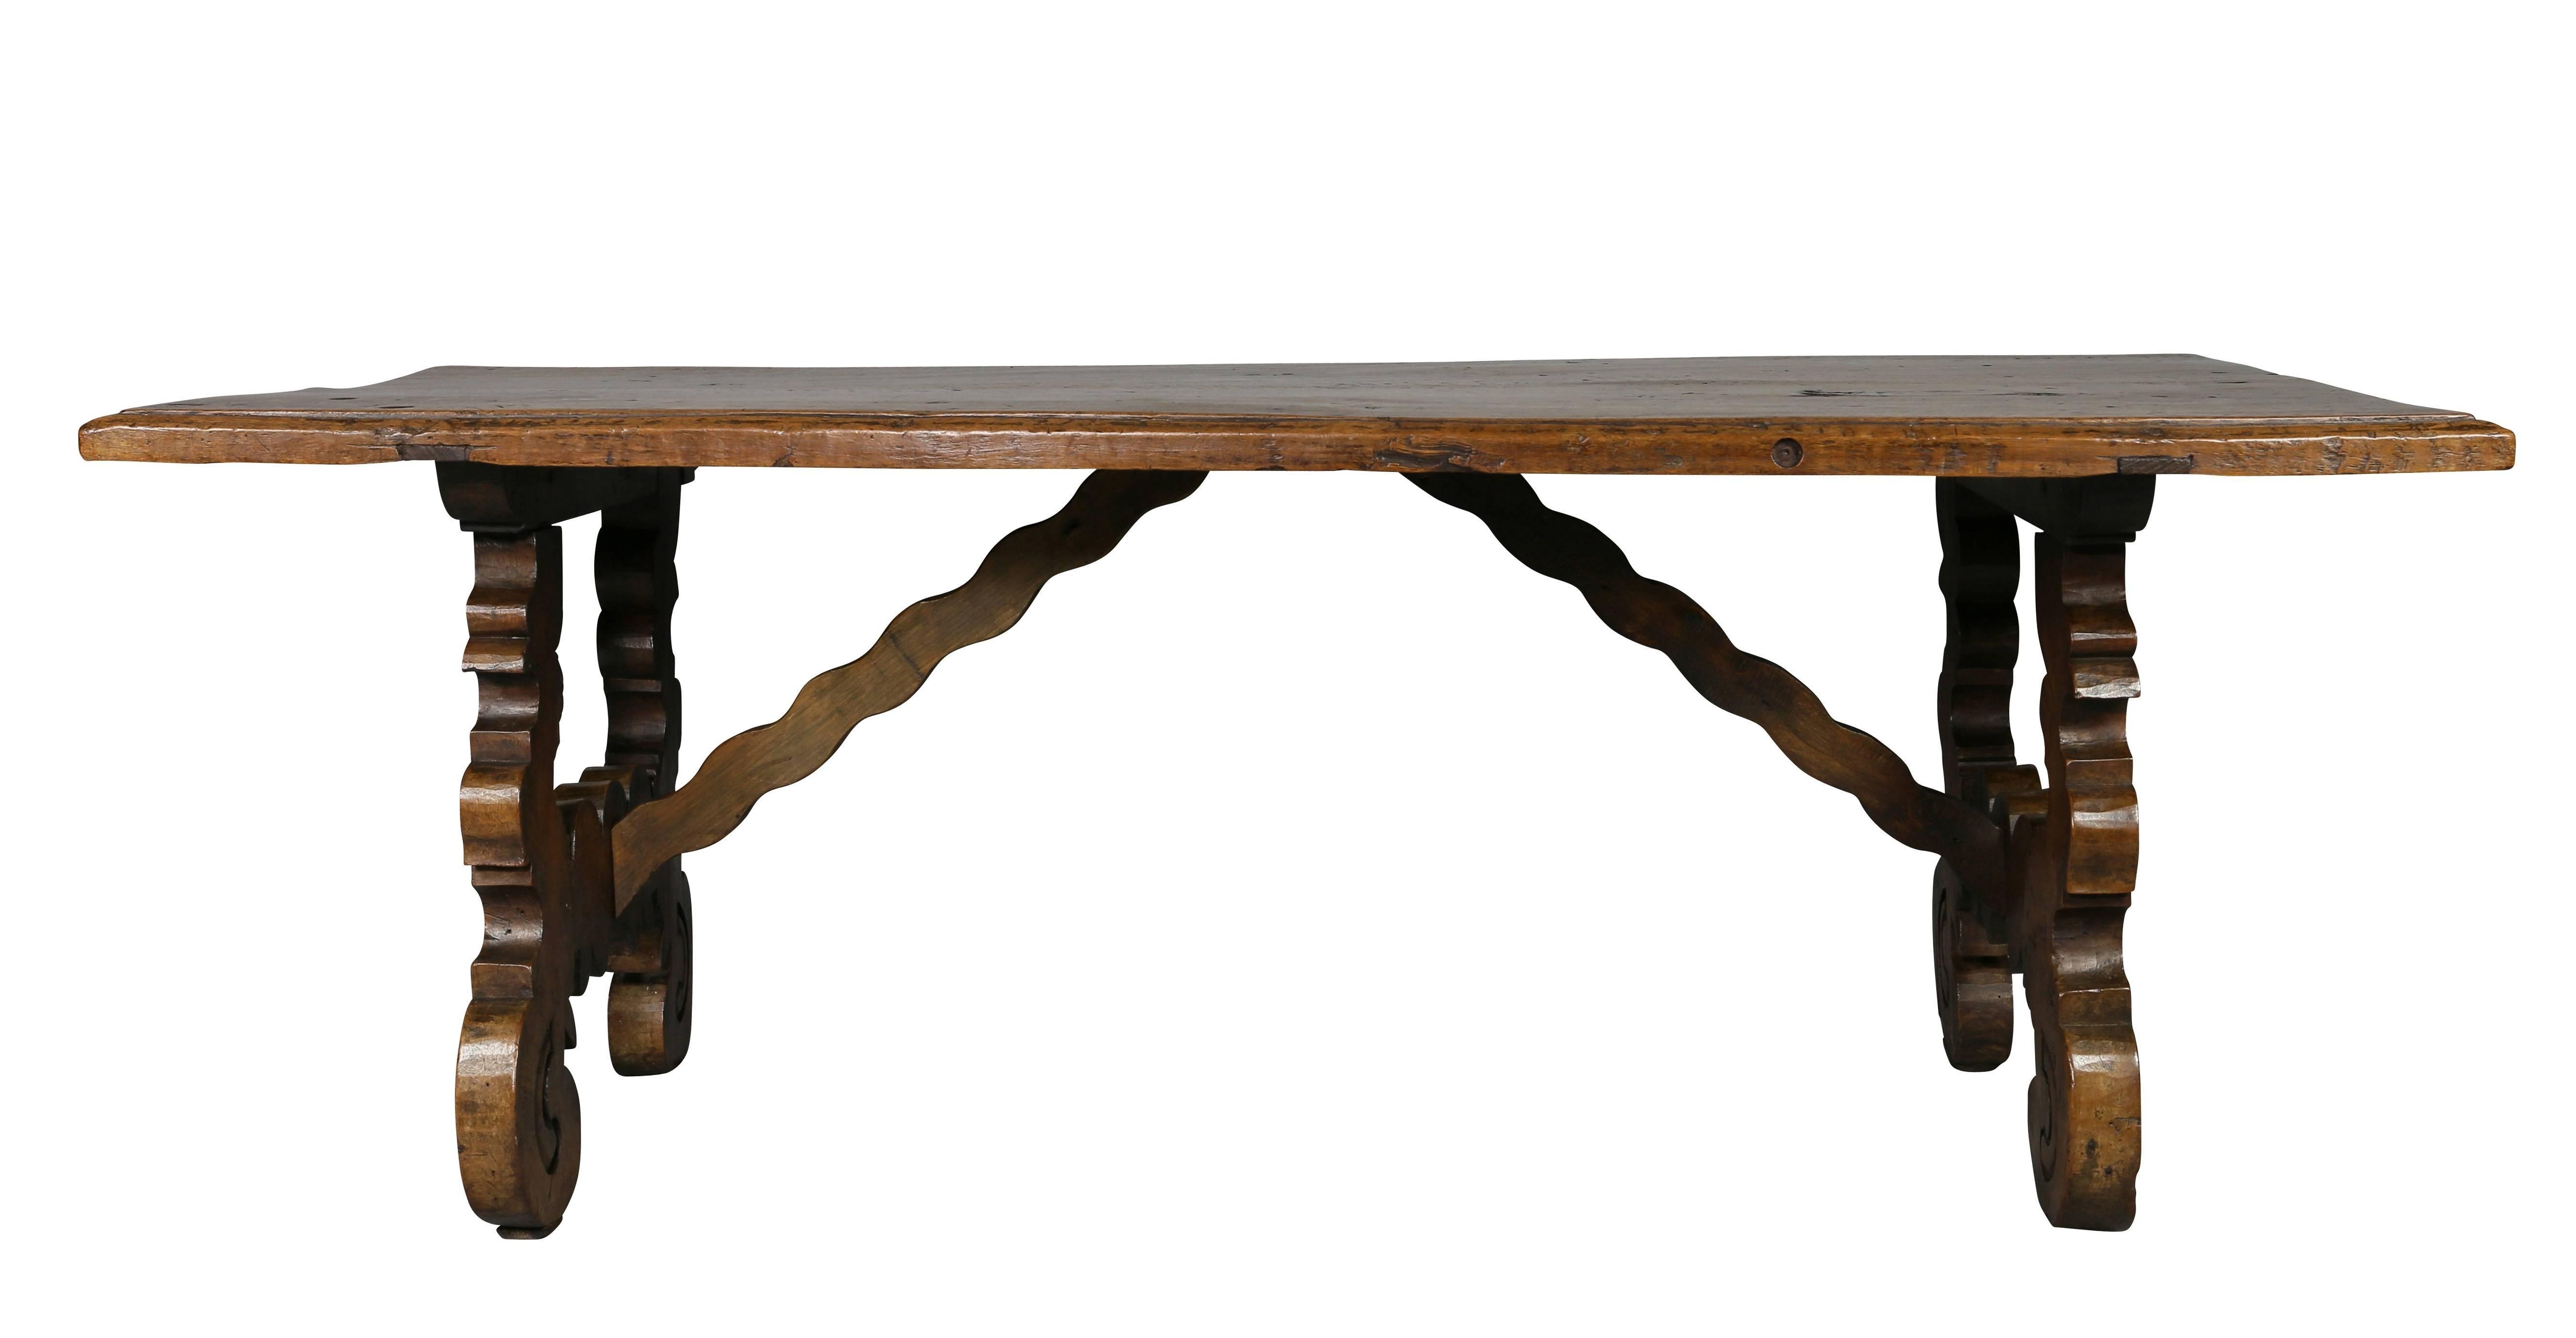 Spanish Colonial Style Walnut Coffee Table For Sale At 1stdibs Intended For Fashionable Spanish Coffee Tables (Gallery 18 of 20)